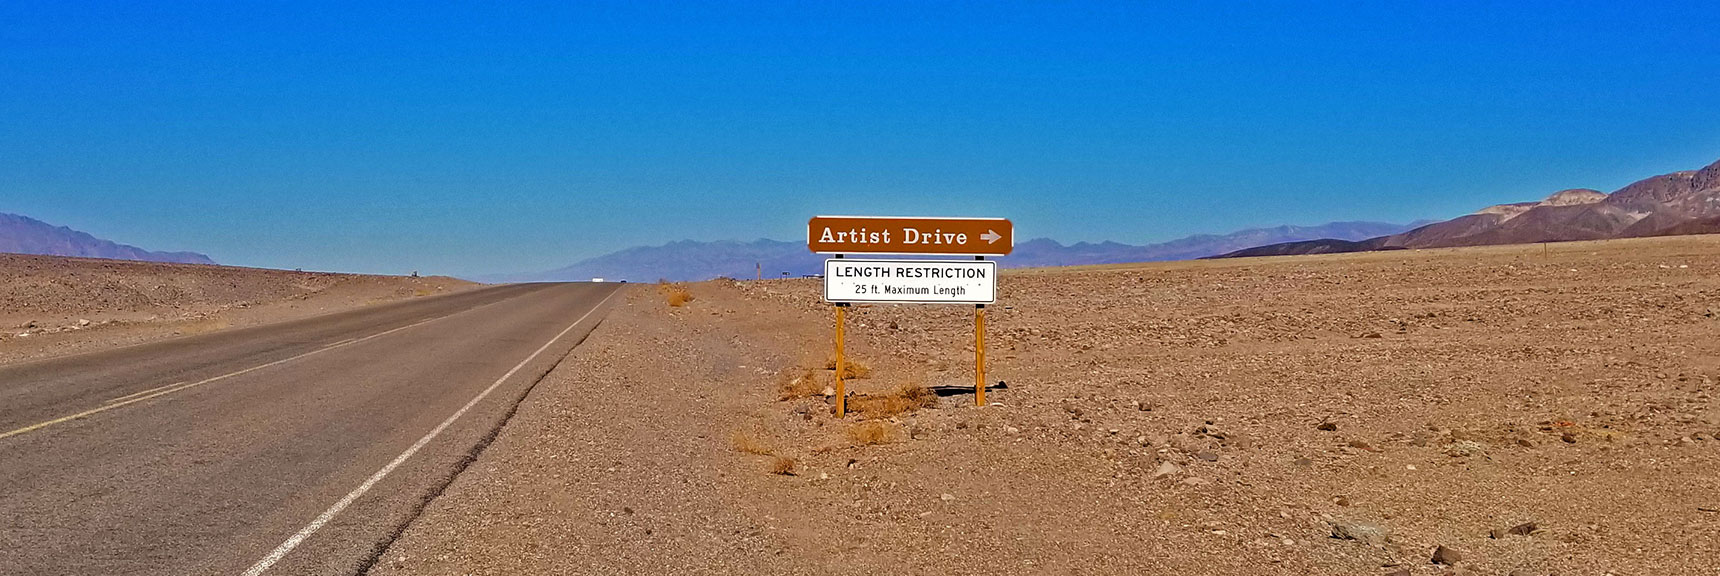 Approaching Artist Drive Turnoff Traveling North on Badwater Road | Artists Drive Hidden Canyon Hikes | Death Valley National Park, California